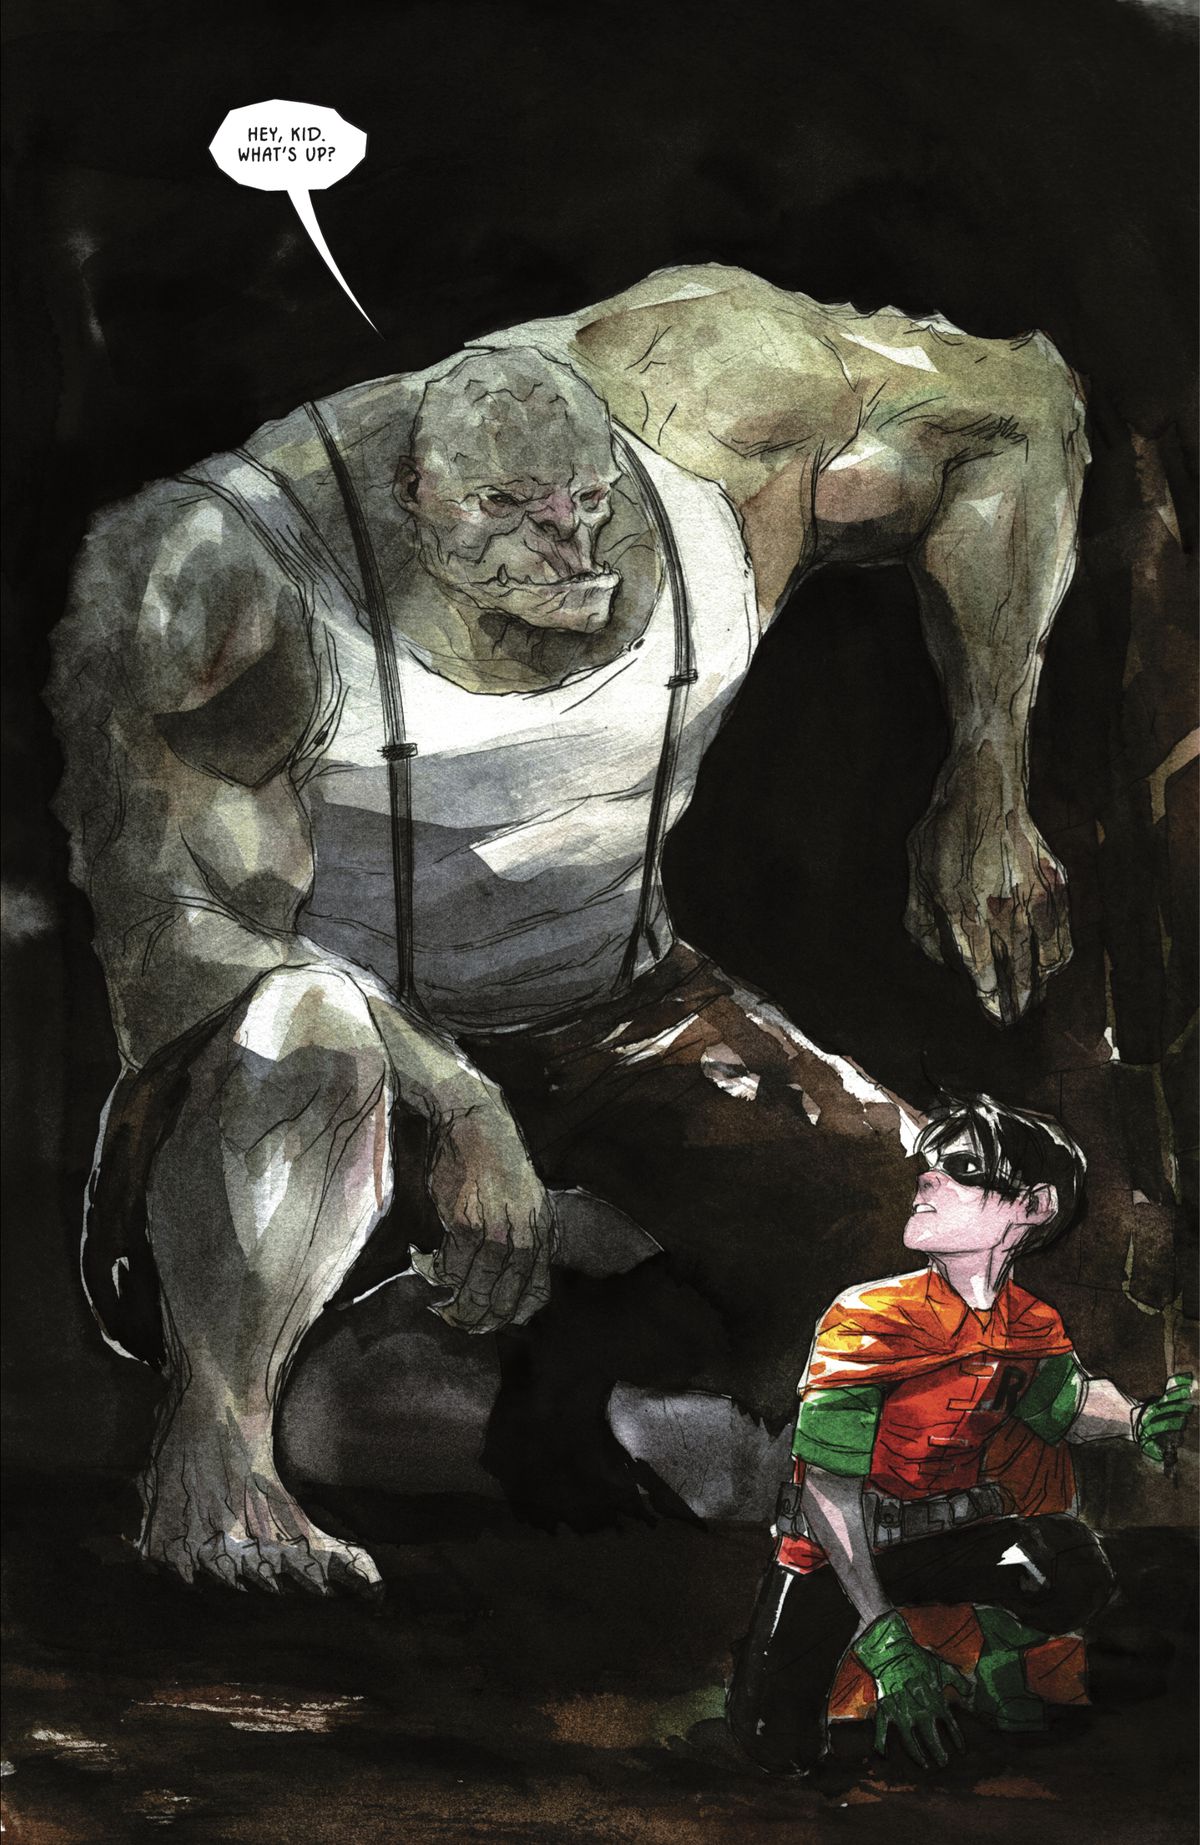 “Hey, kid. What’s up?” says Killer Croc, who, even kneeling, looms hugely above Robin/Dick Grayson in Robin &amp; Batman #1 (2021). 